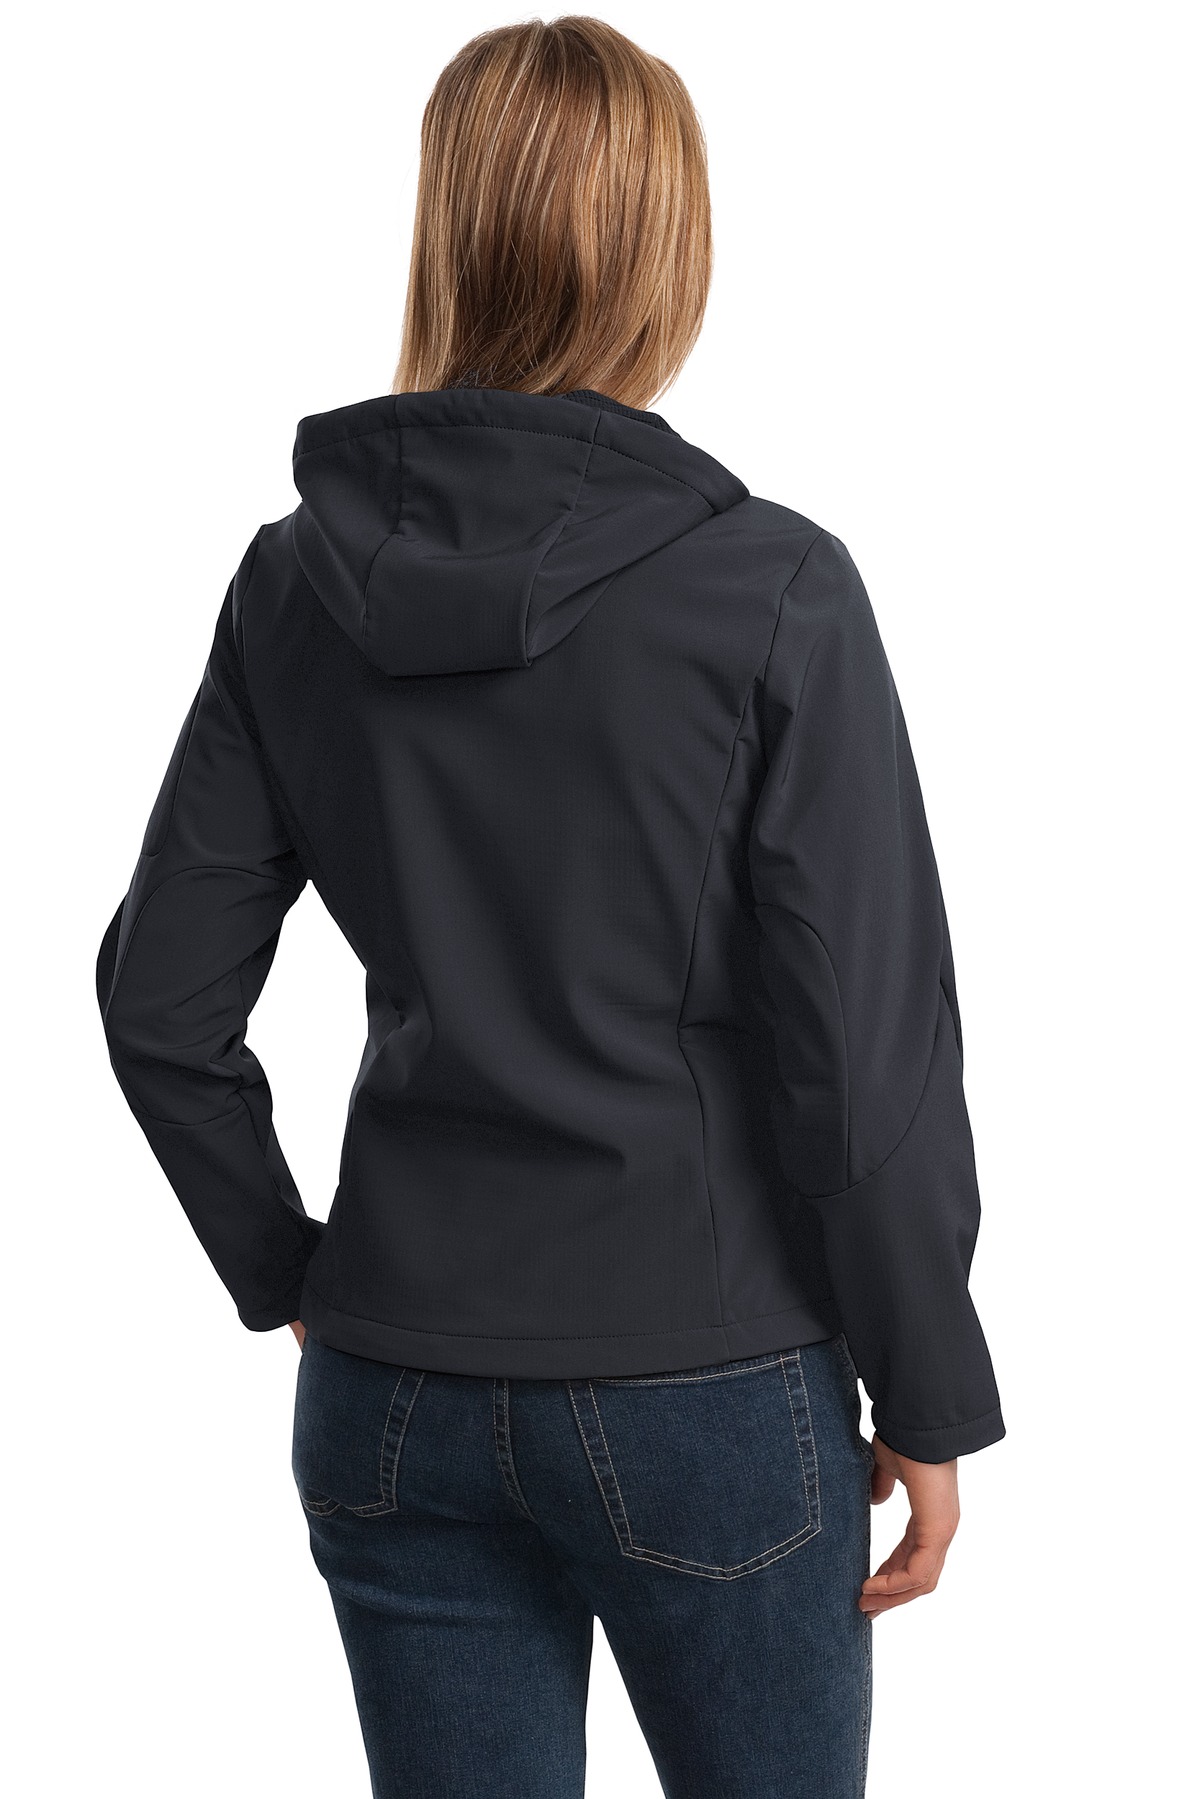 Textured Hooded Soft Shell Jacket - image 2 of 2